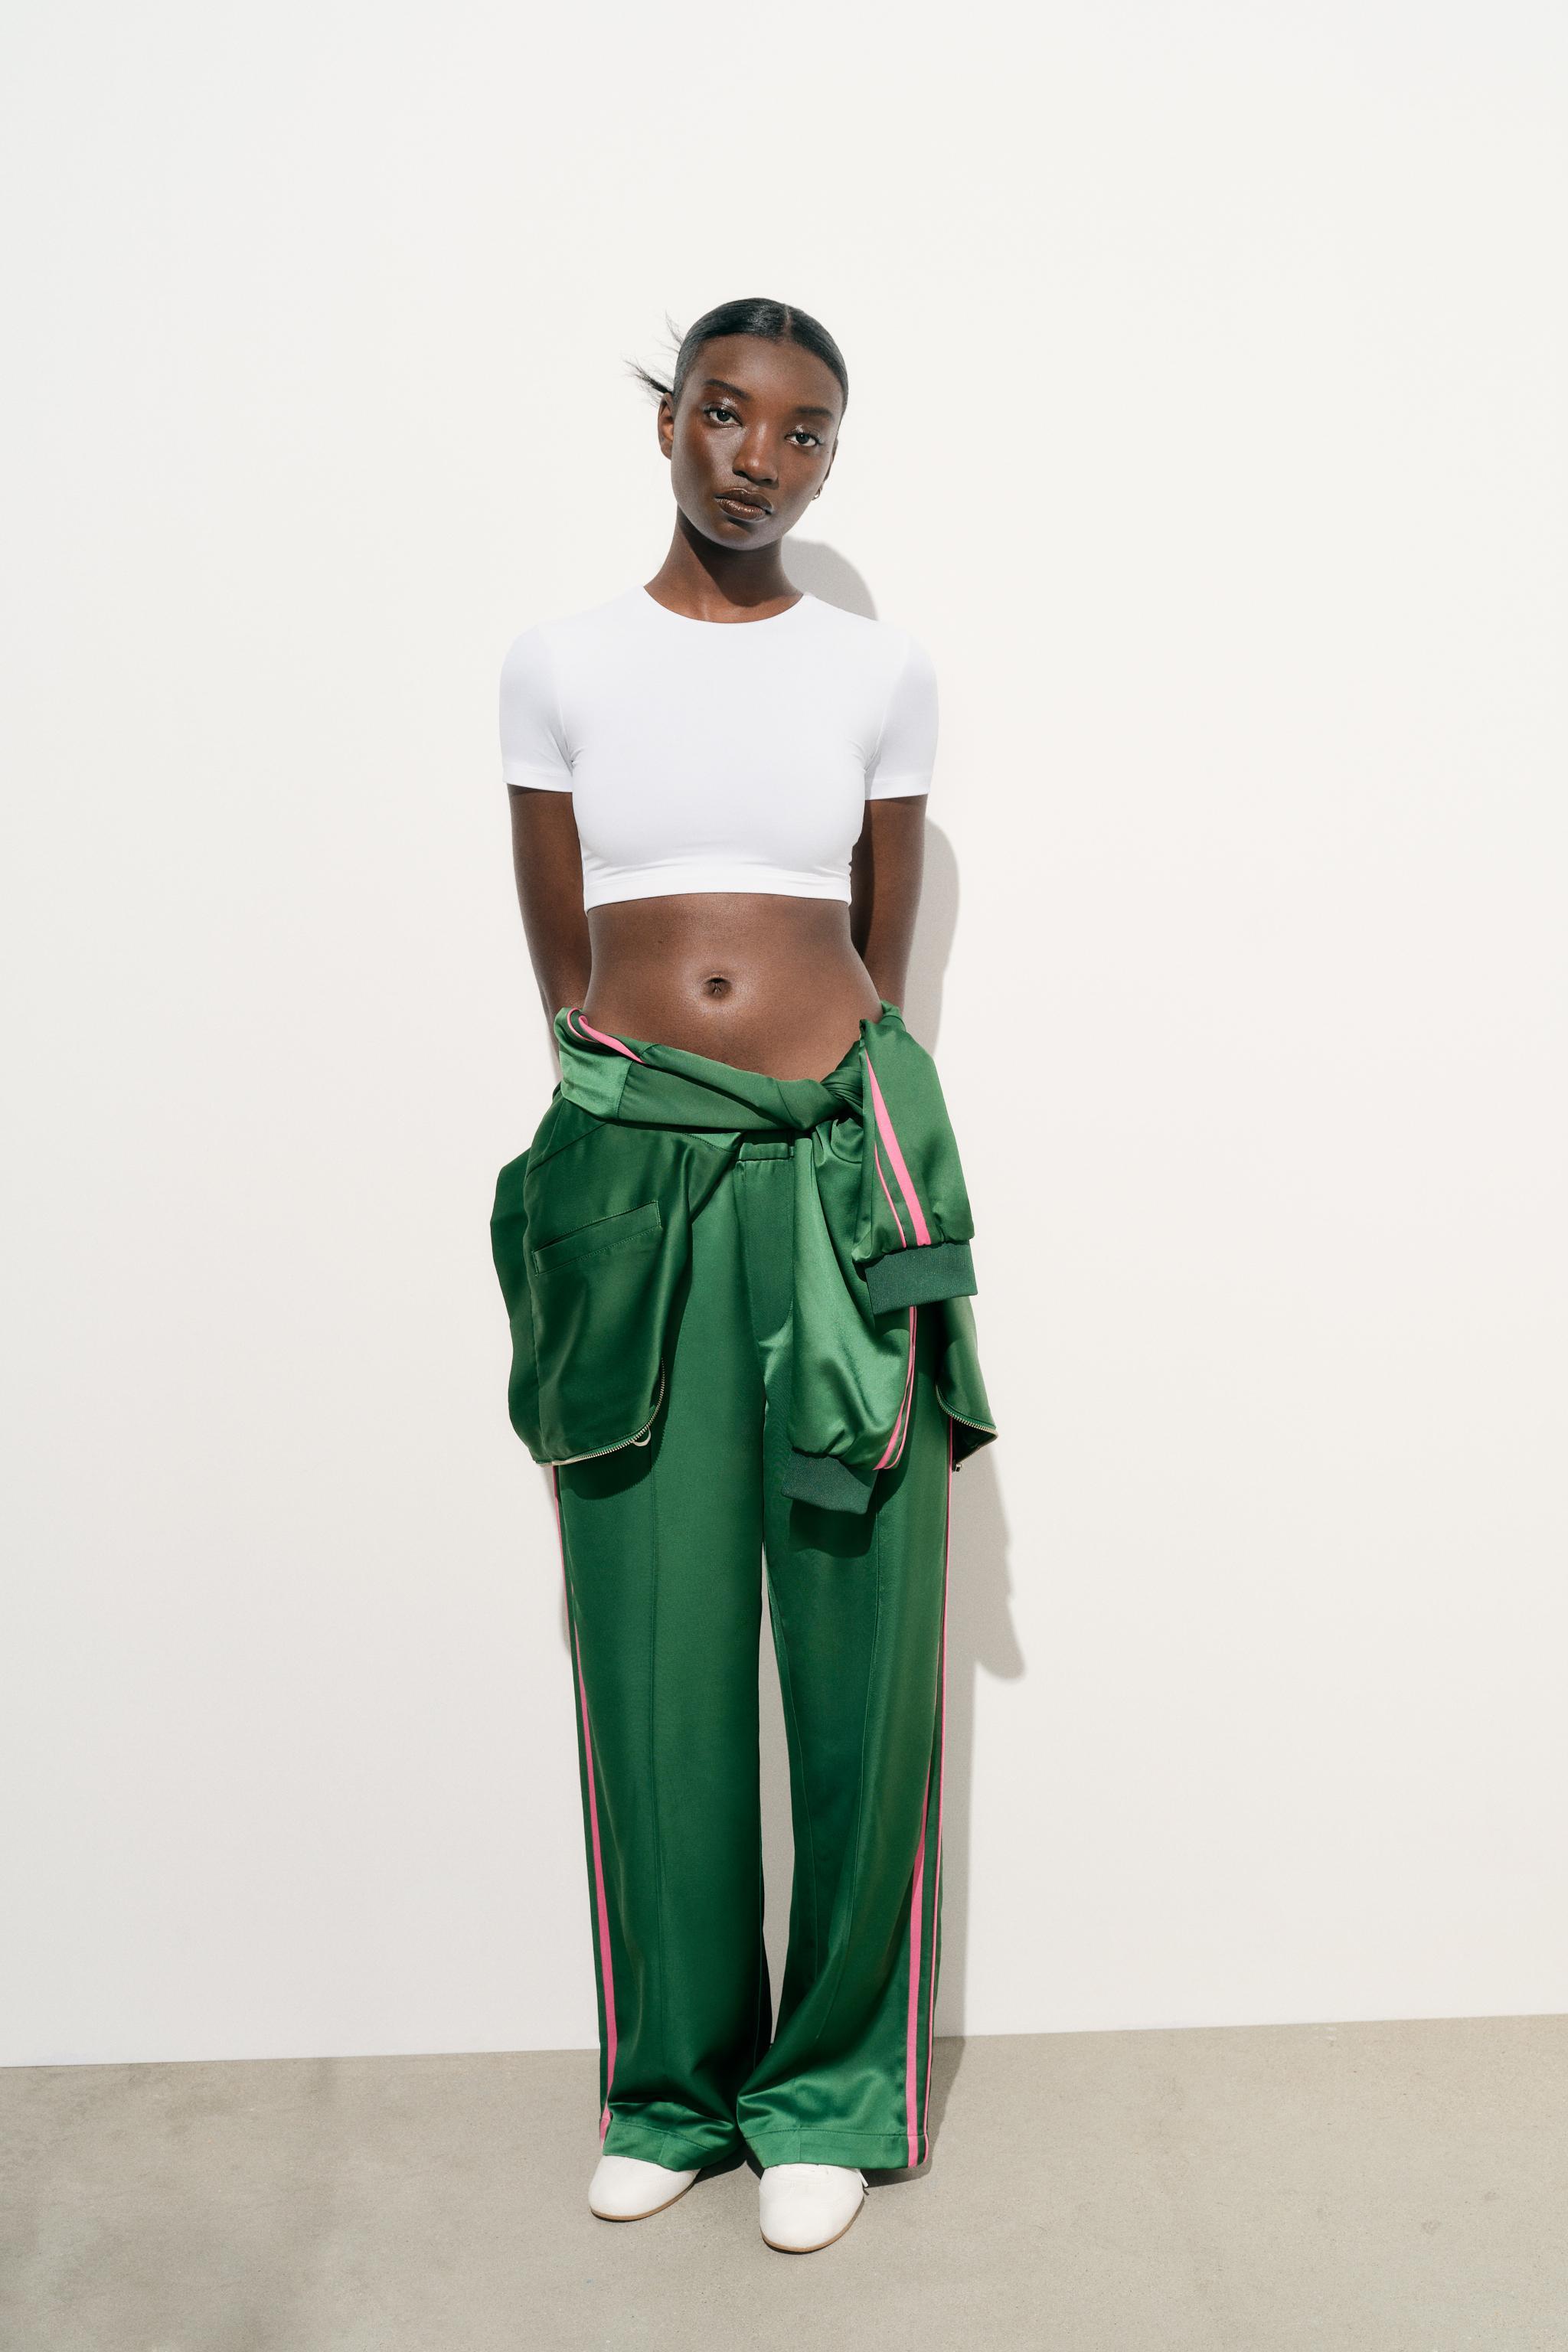 Olive Green Halter Wrap Top And Palazzo Satin Pants Set - S / Olive